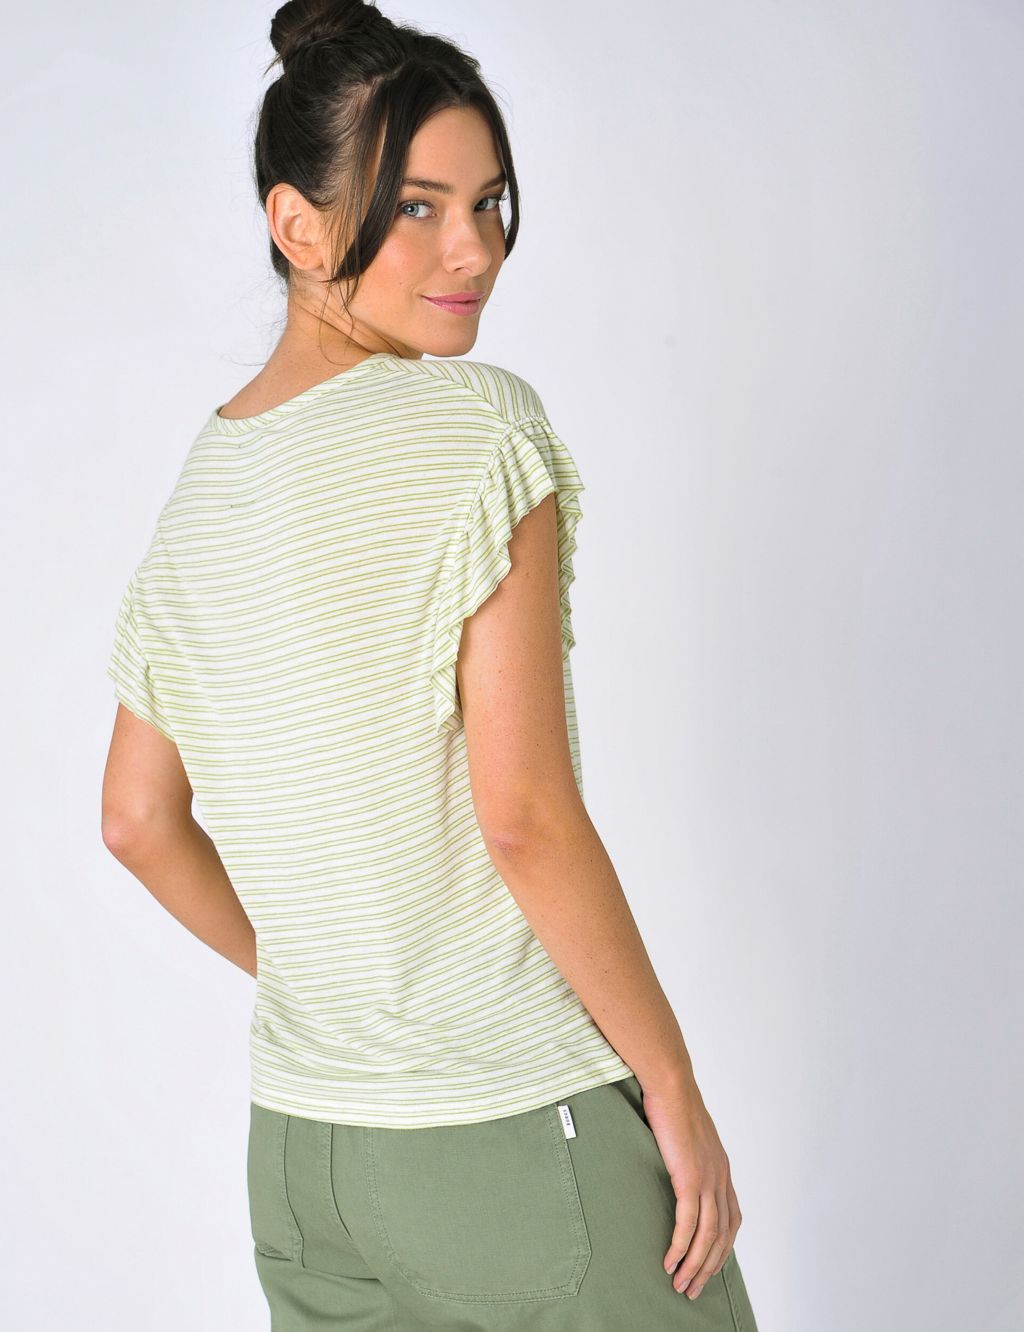 Jersey Striped Frill Detail Top image 3